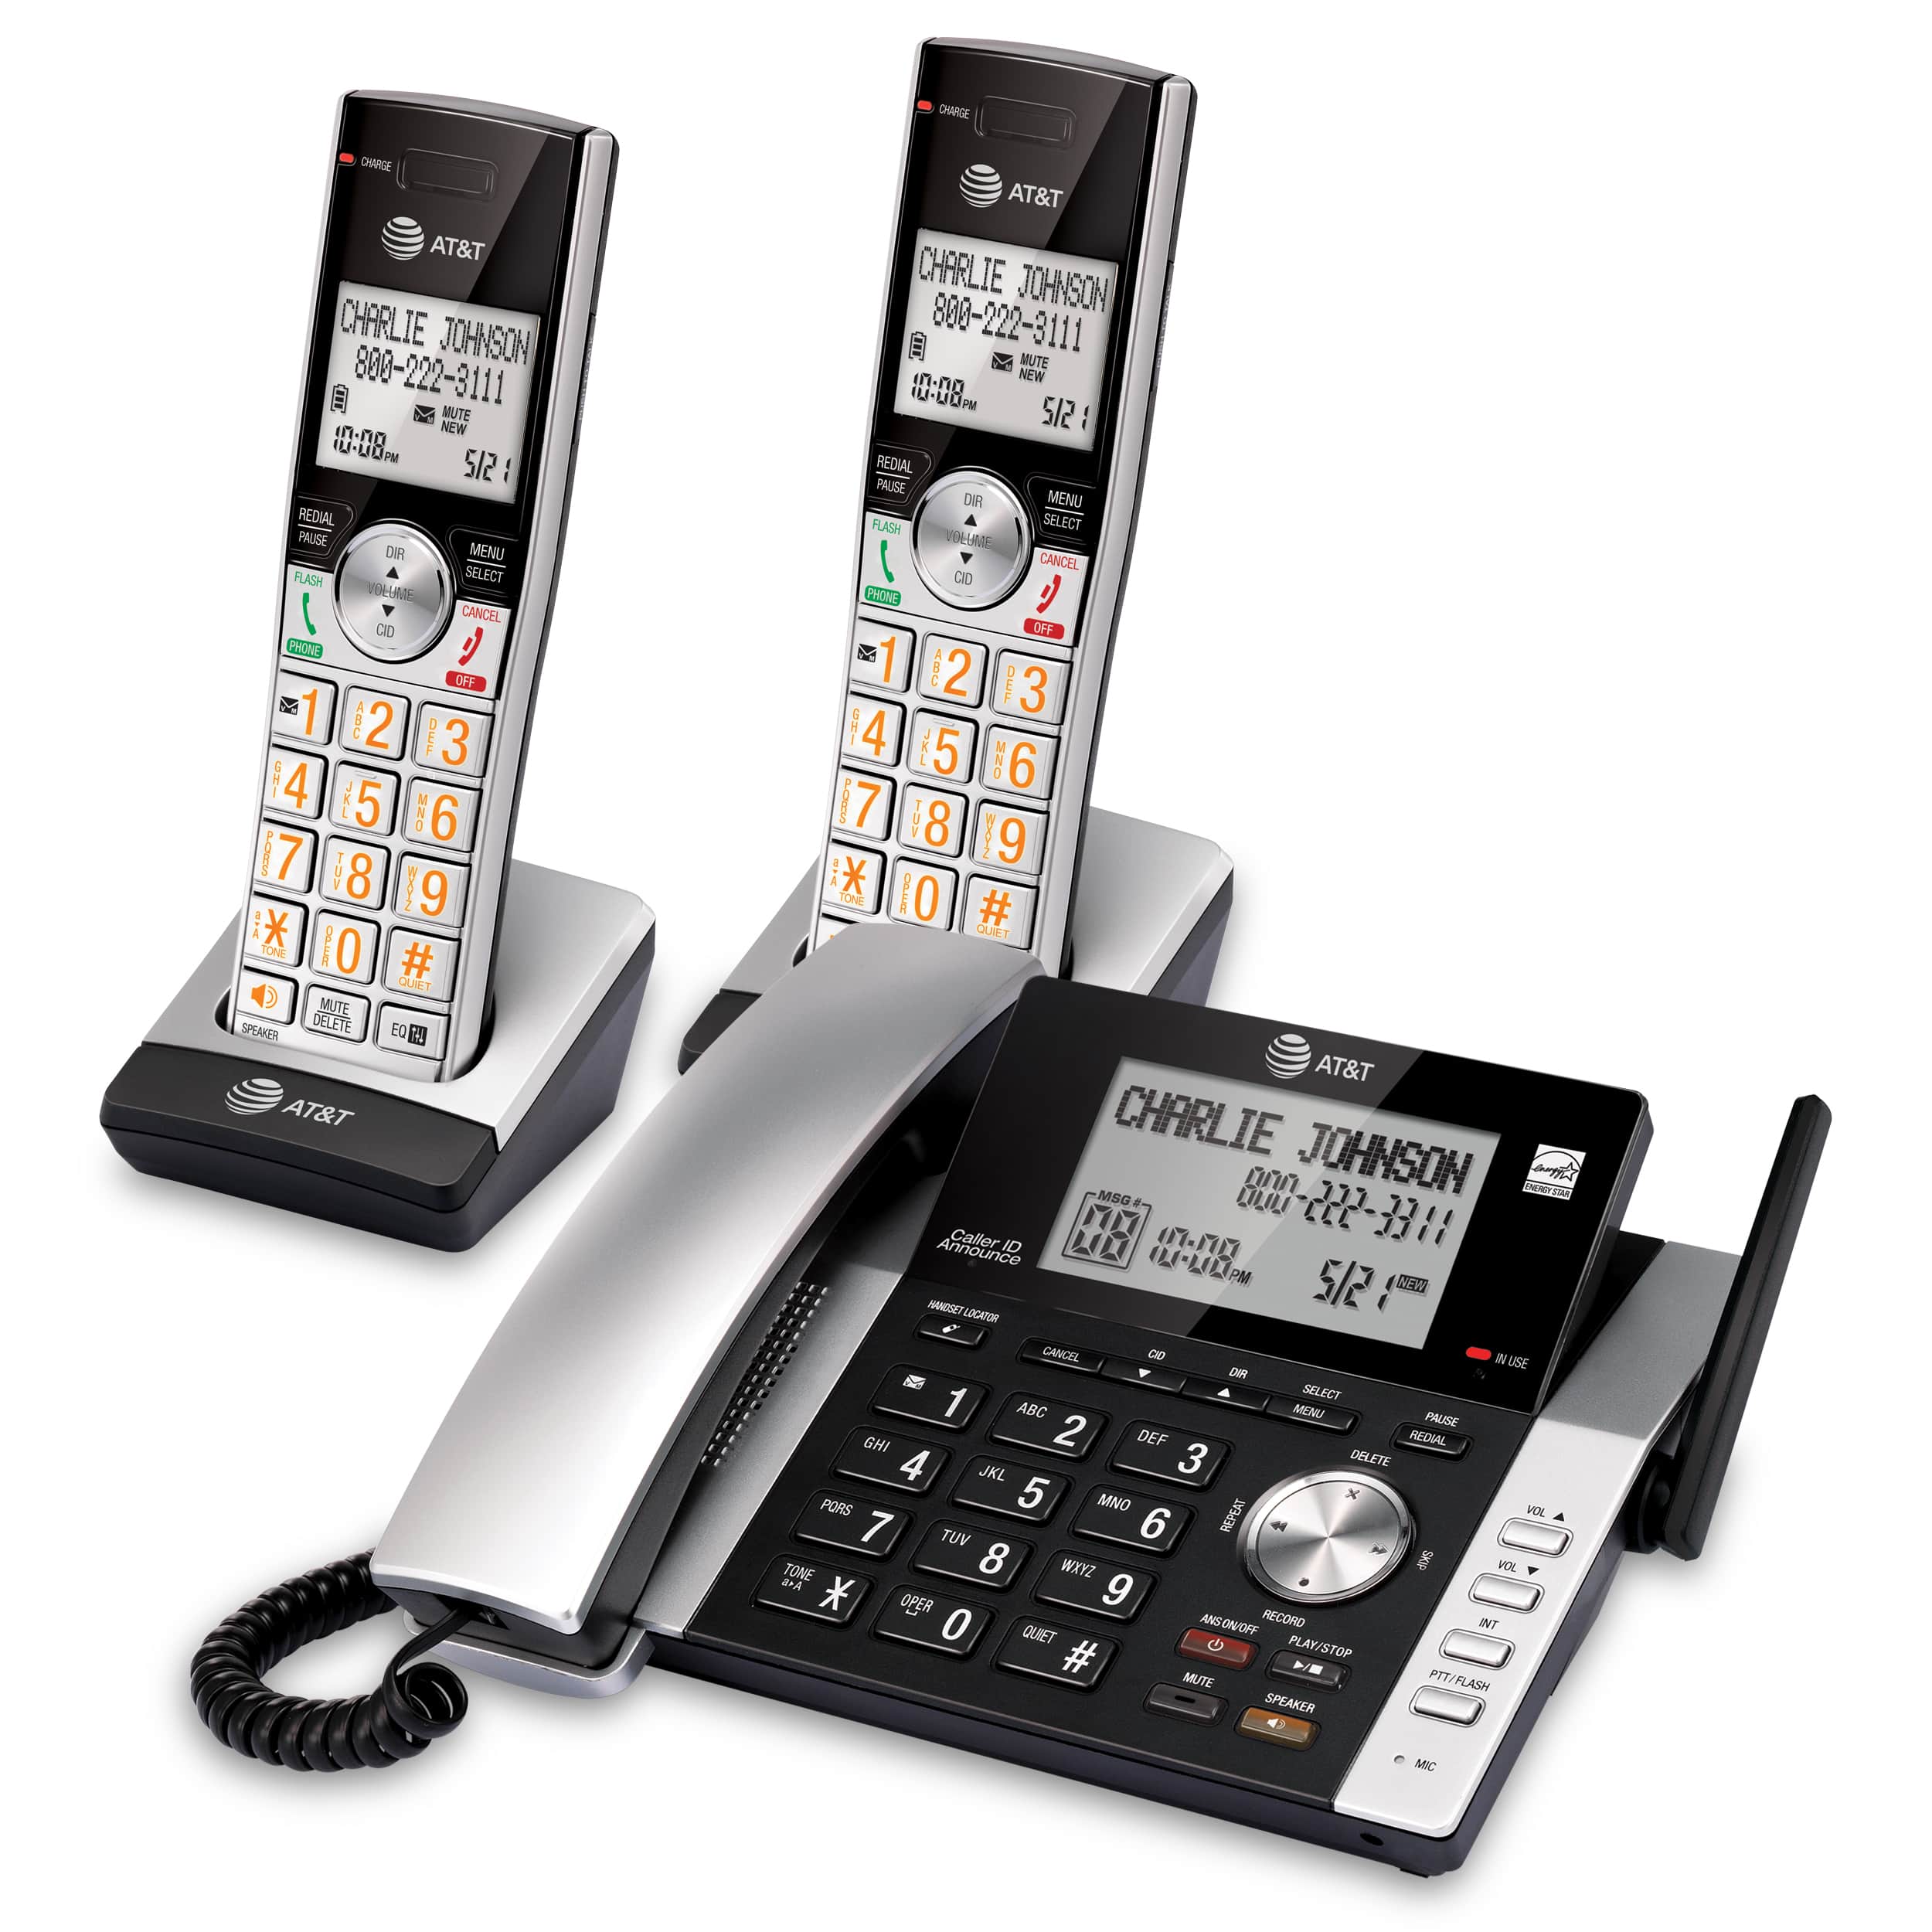 2 handset corded/cordless answering system with caller ID/call waiting - view 2